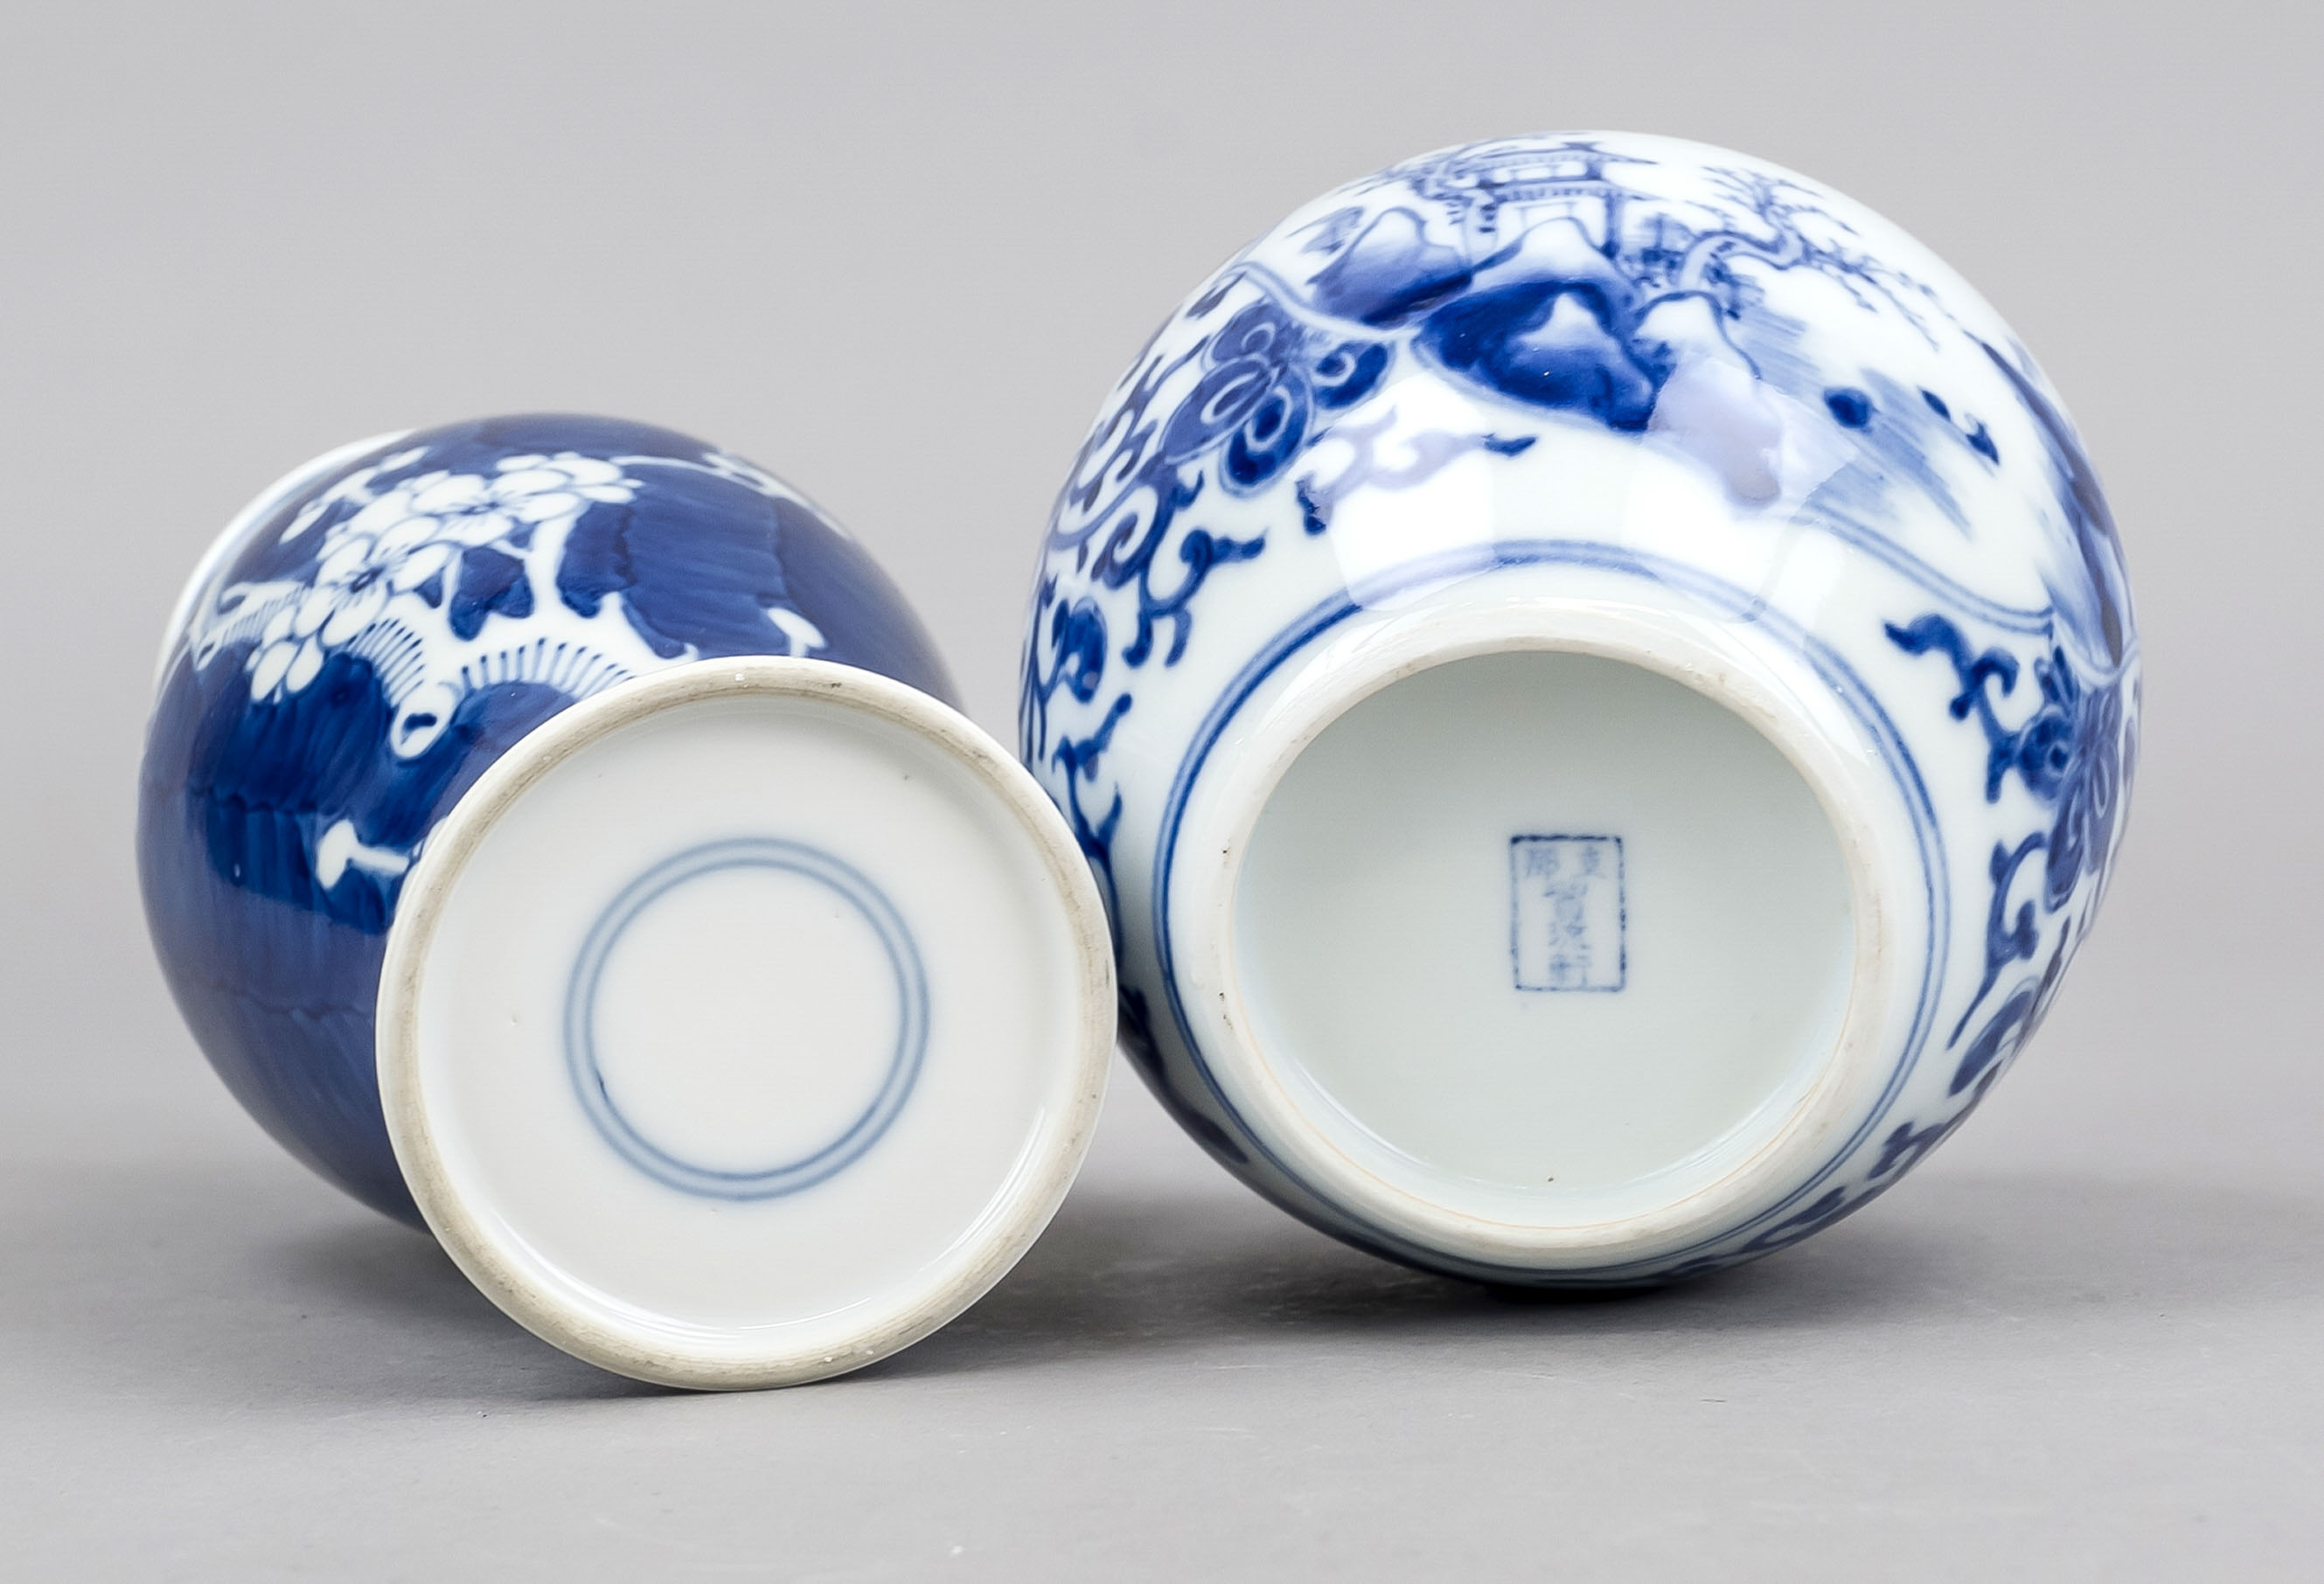 2 vases, China, 19th/20th century, 1 small prunus vase with surrounding cobalt blue decoration, a - Image 3 of 3